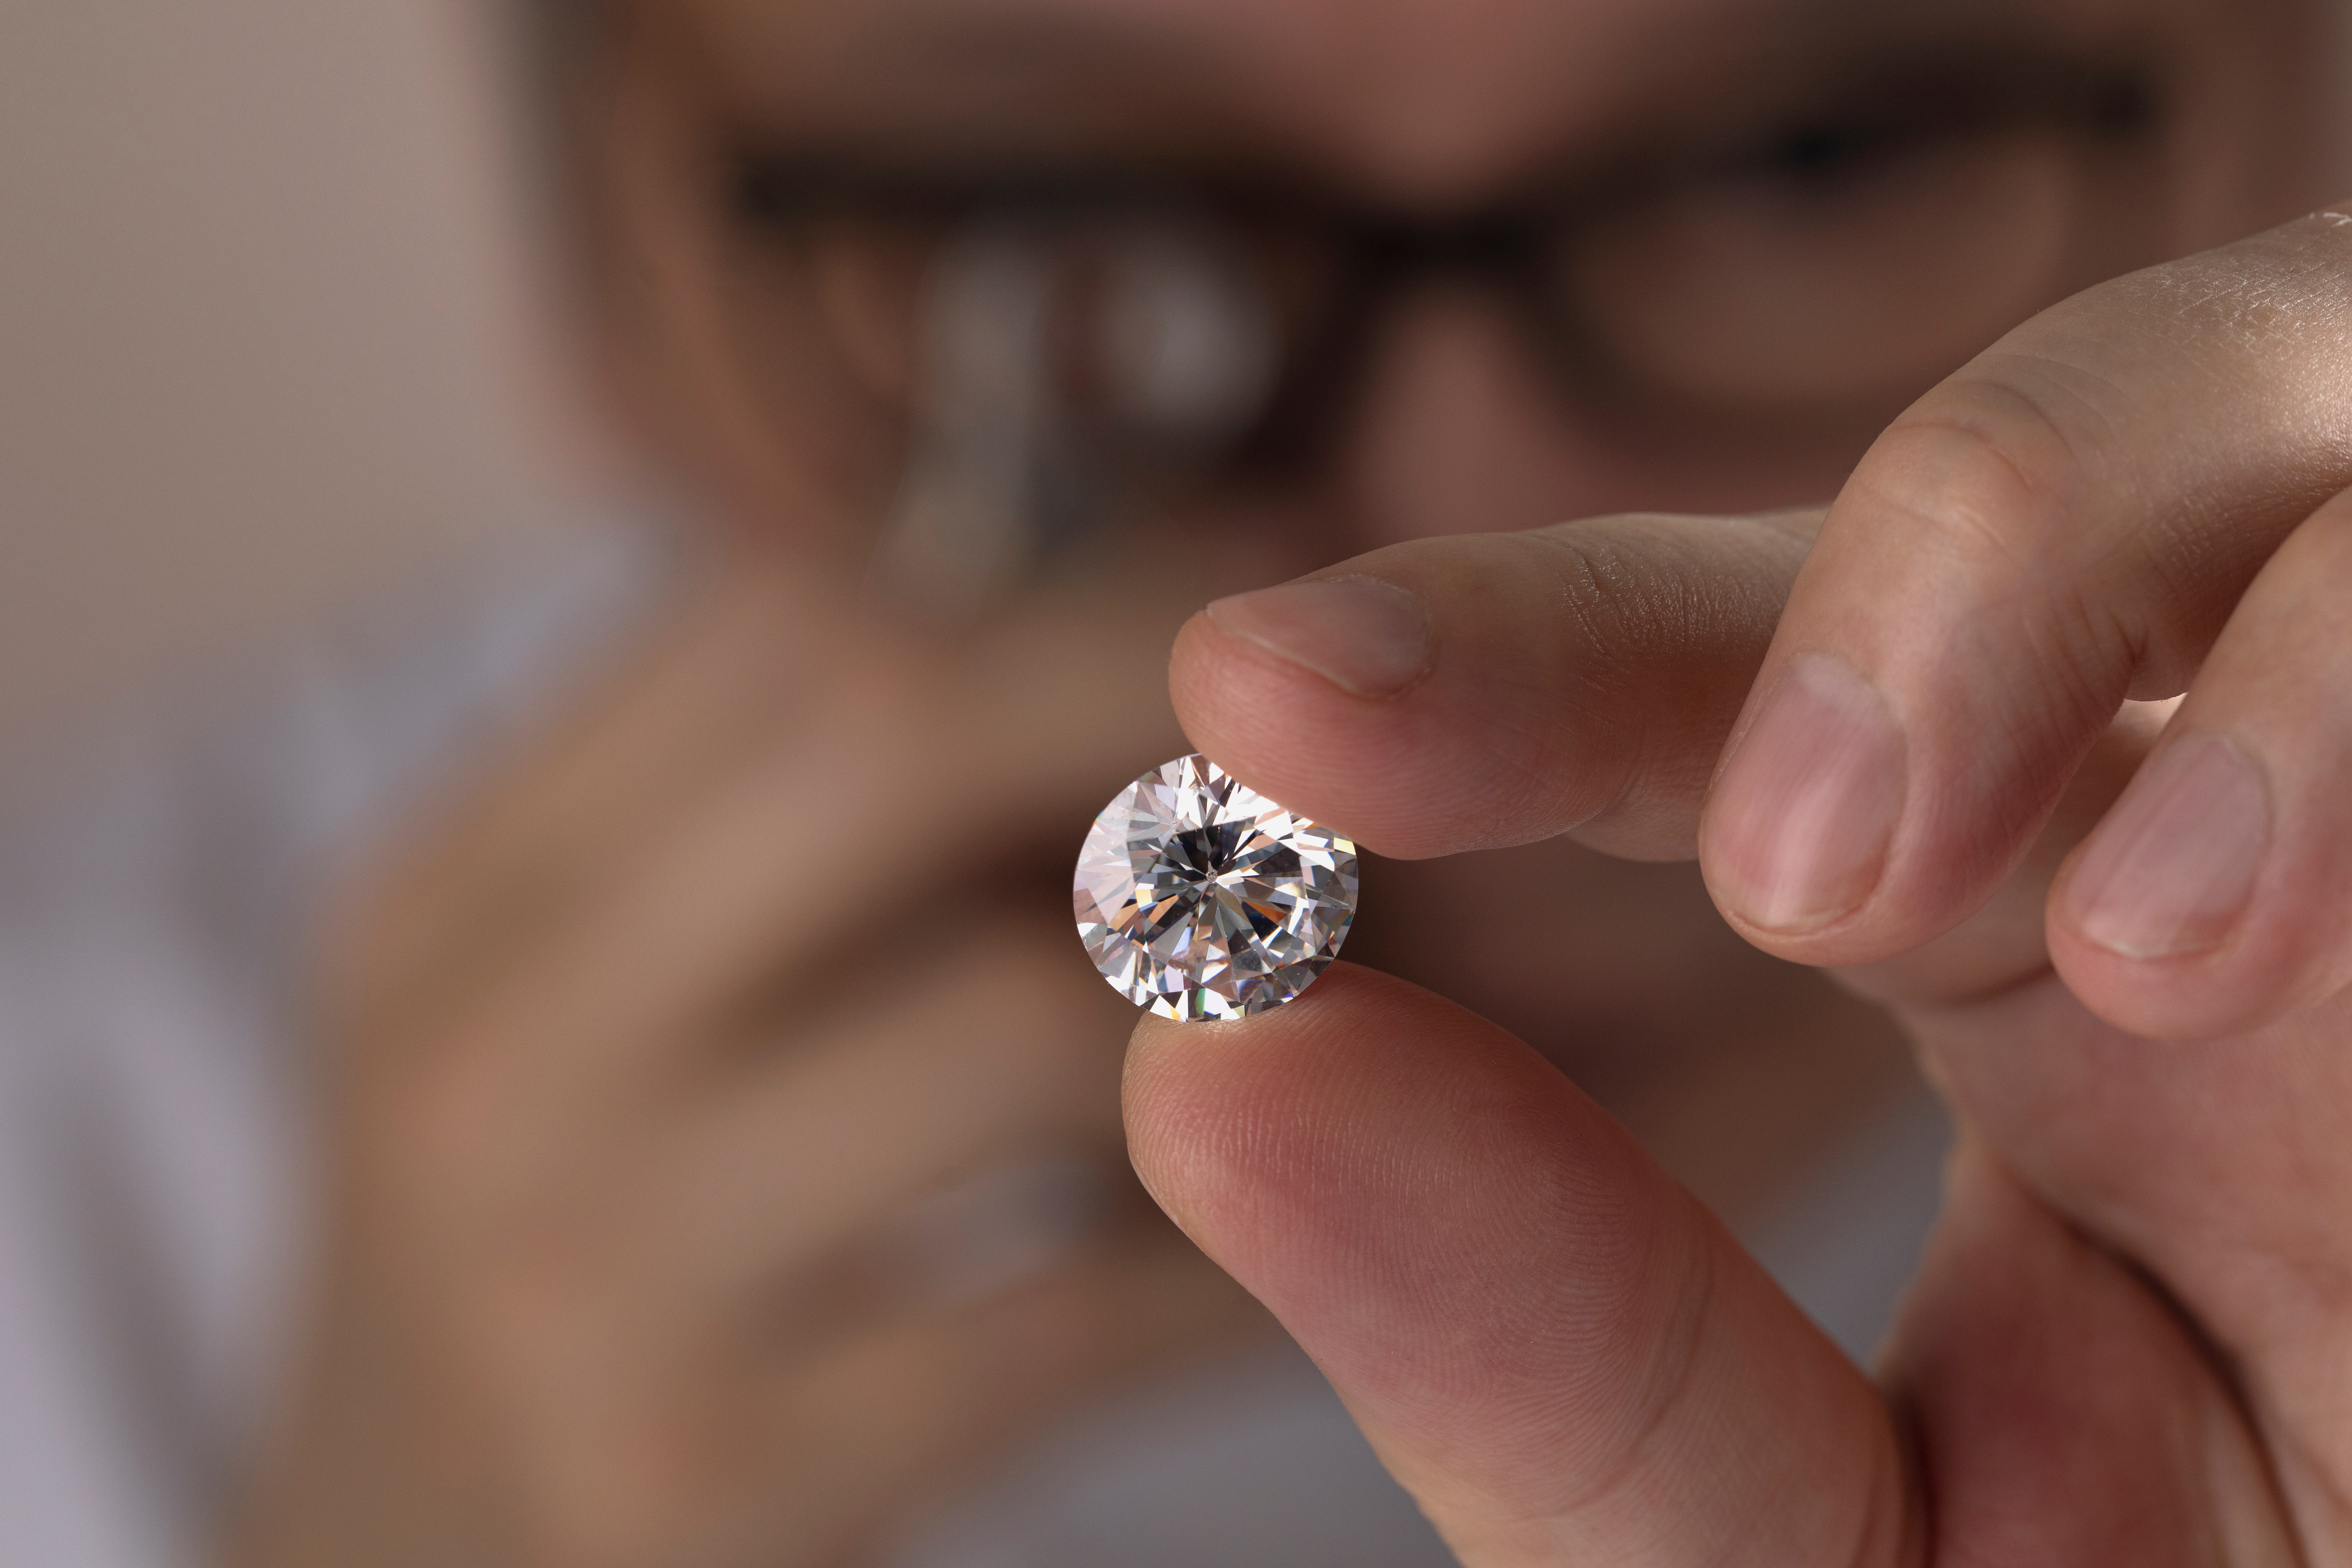 Man in glasses is looking at diamond | Source: Shutterstock.com